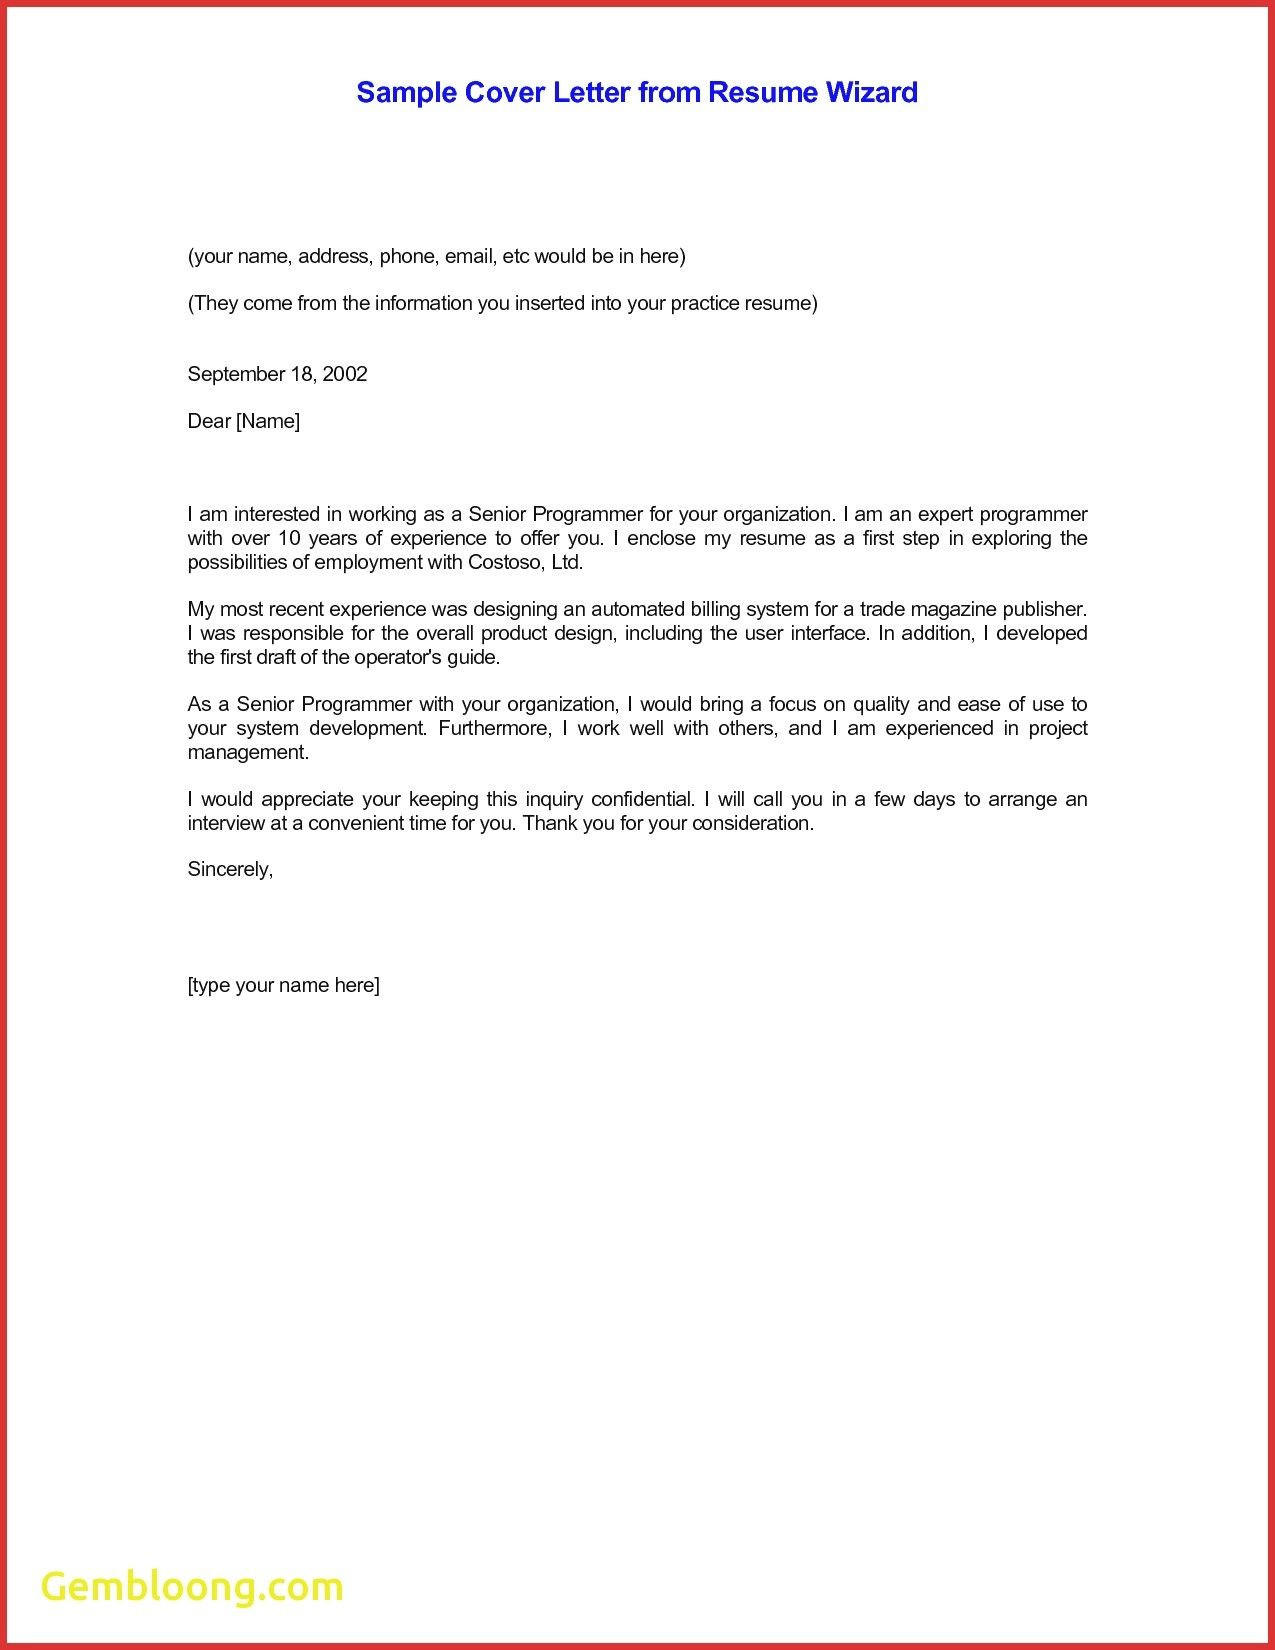 Email with Resume Sample without Cover Letter attached Email Cv Cover Letter Template – Resume format Cover Letter for …